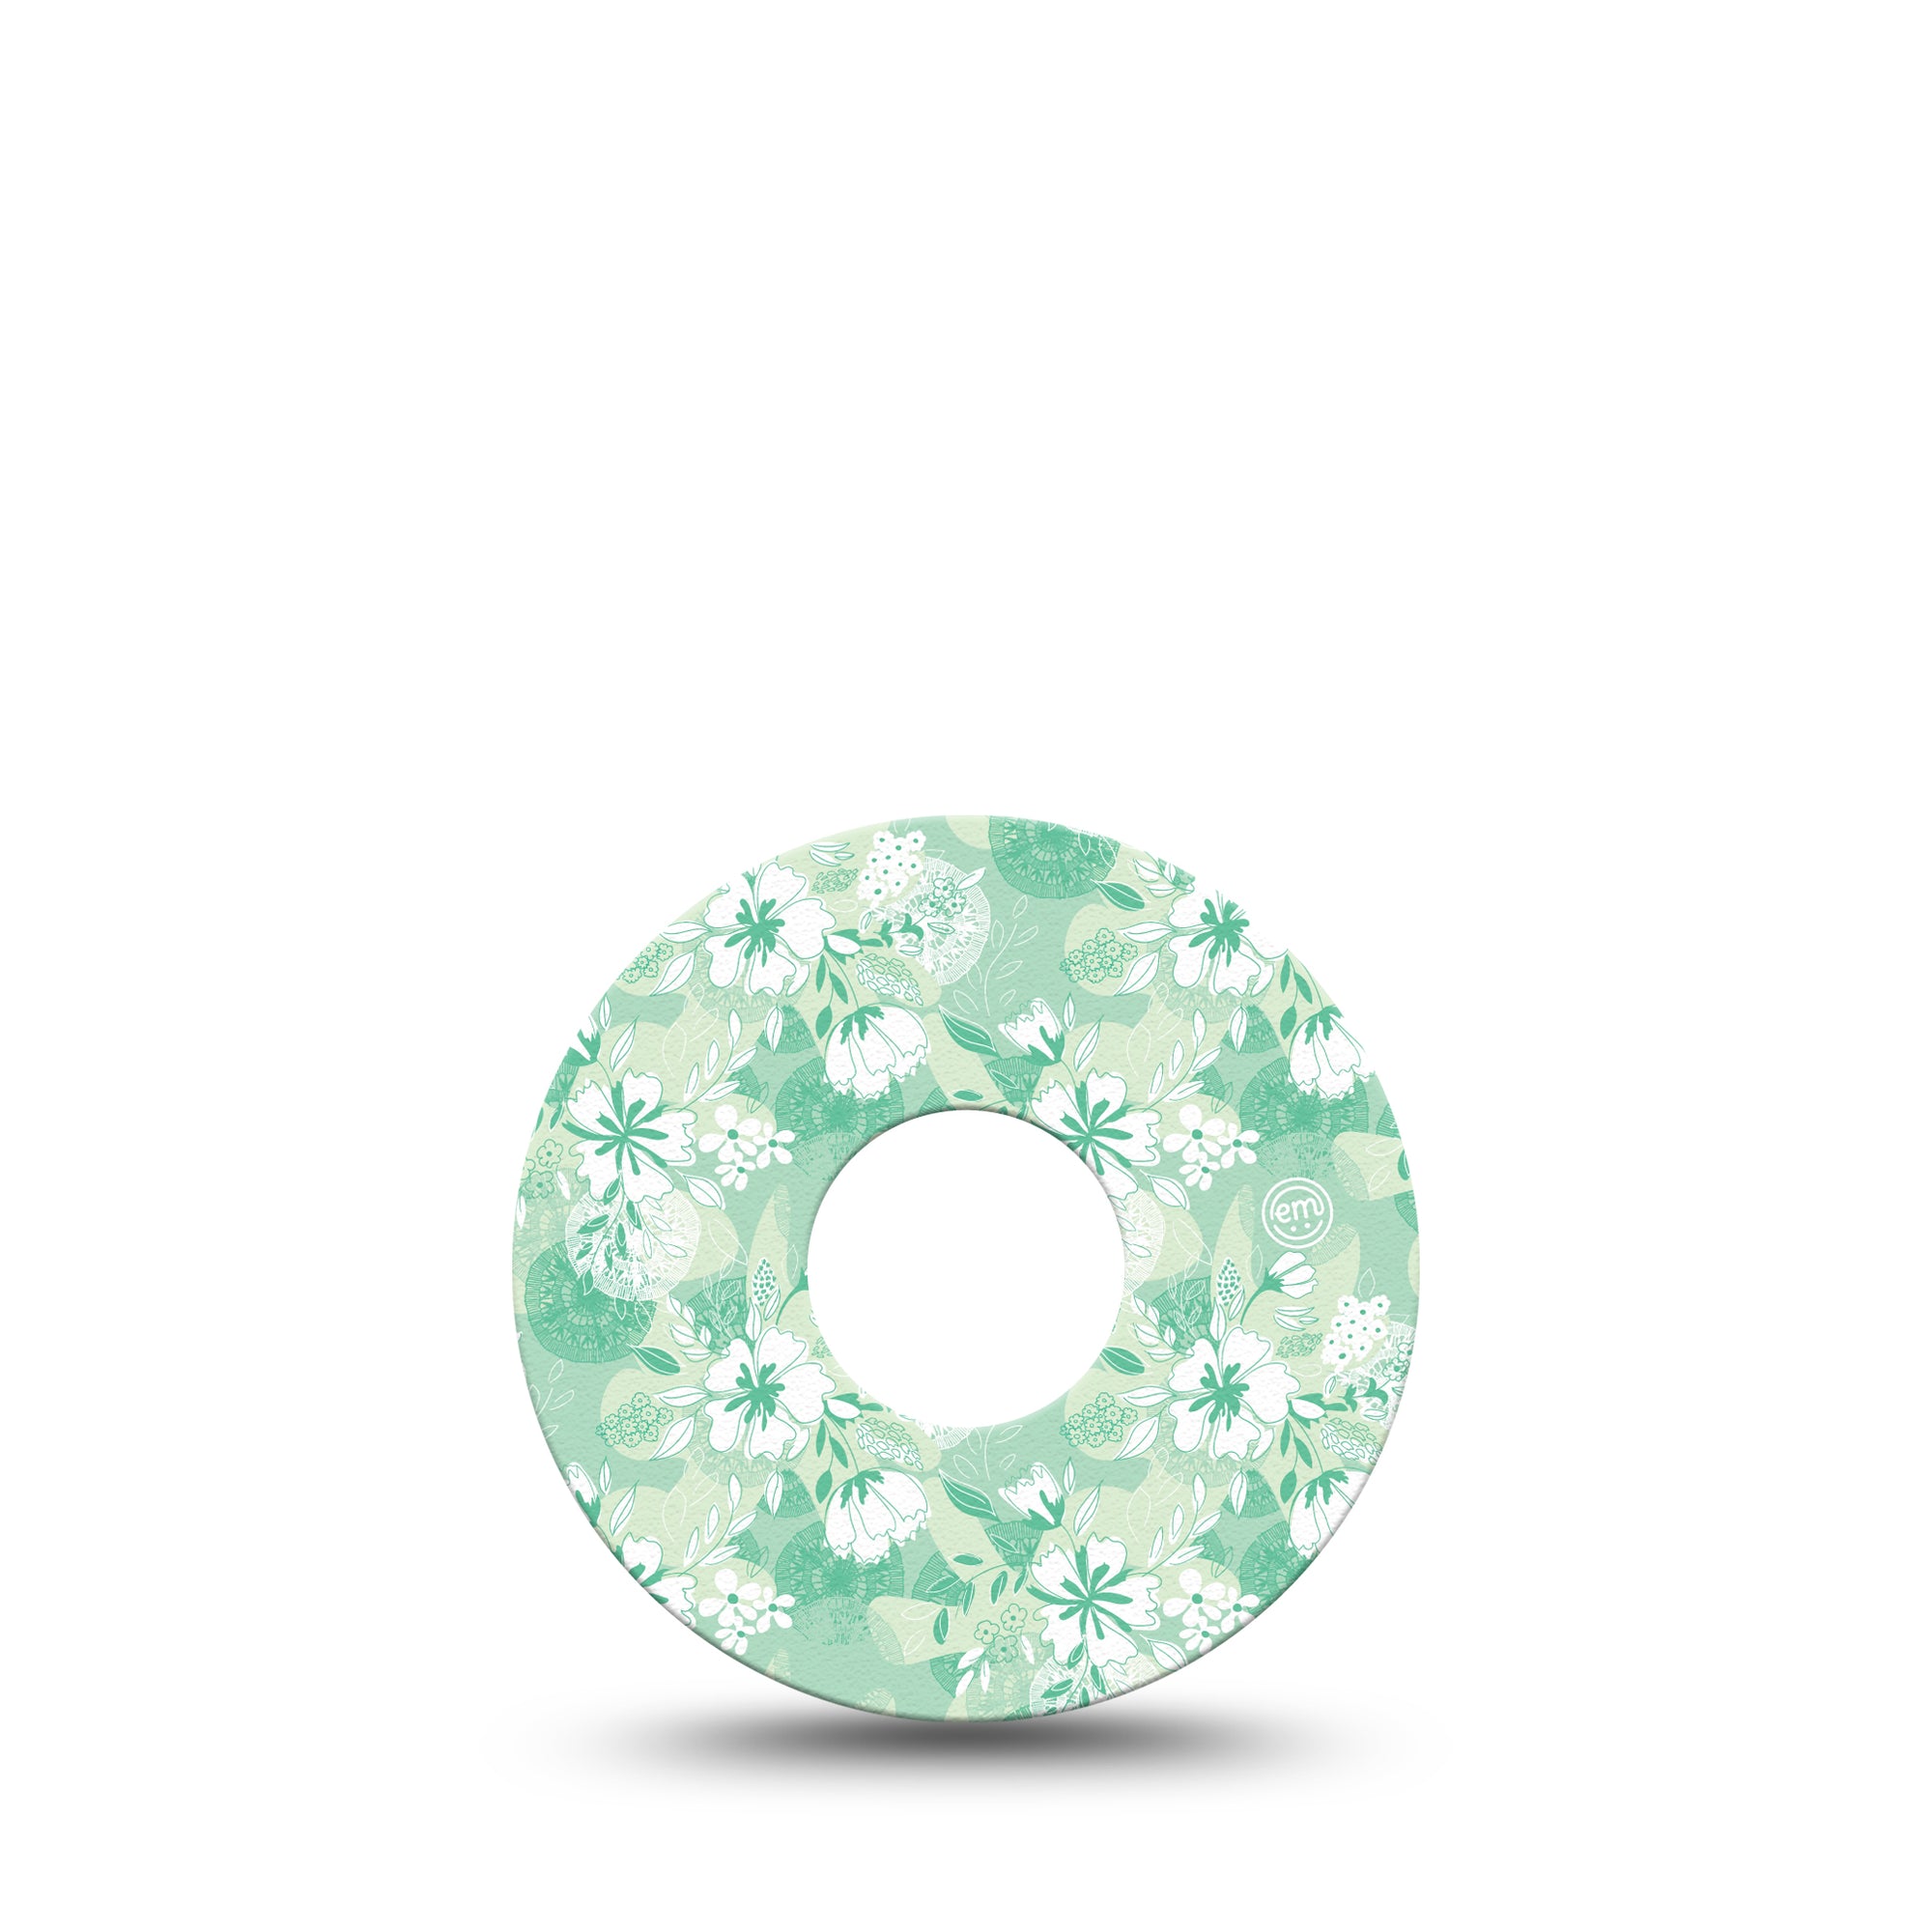 Airy Florals Libre 3 Tape, Mint White Flowers Inspired CGM Adhesive Patch Design